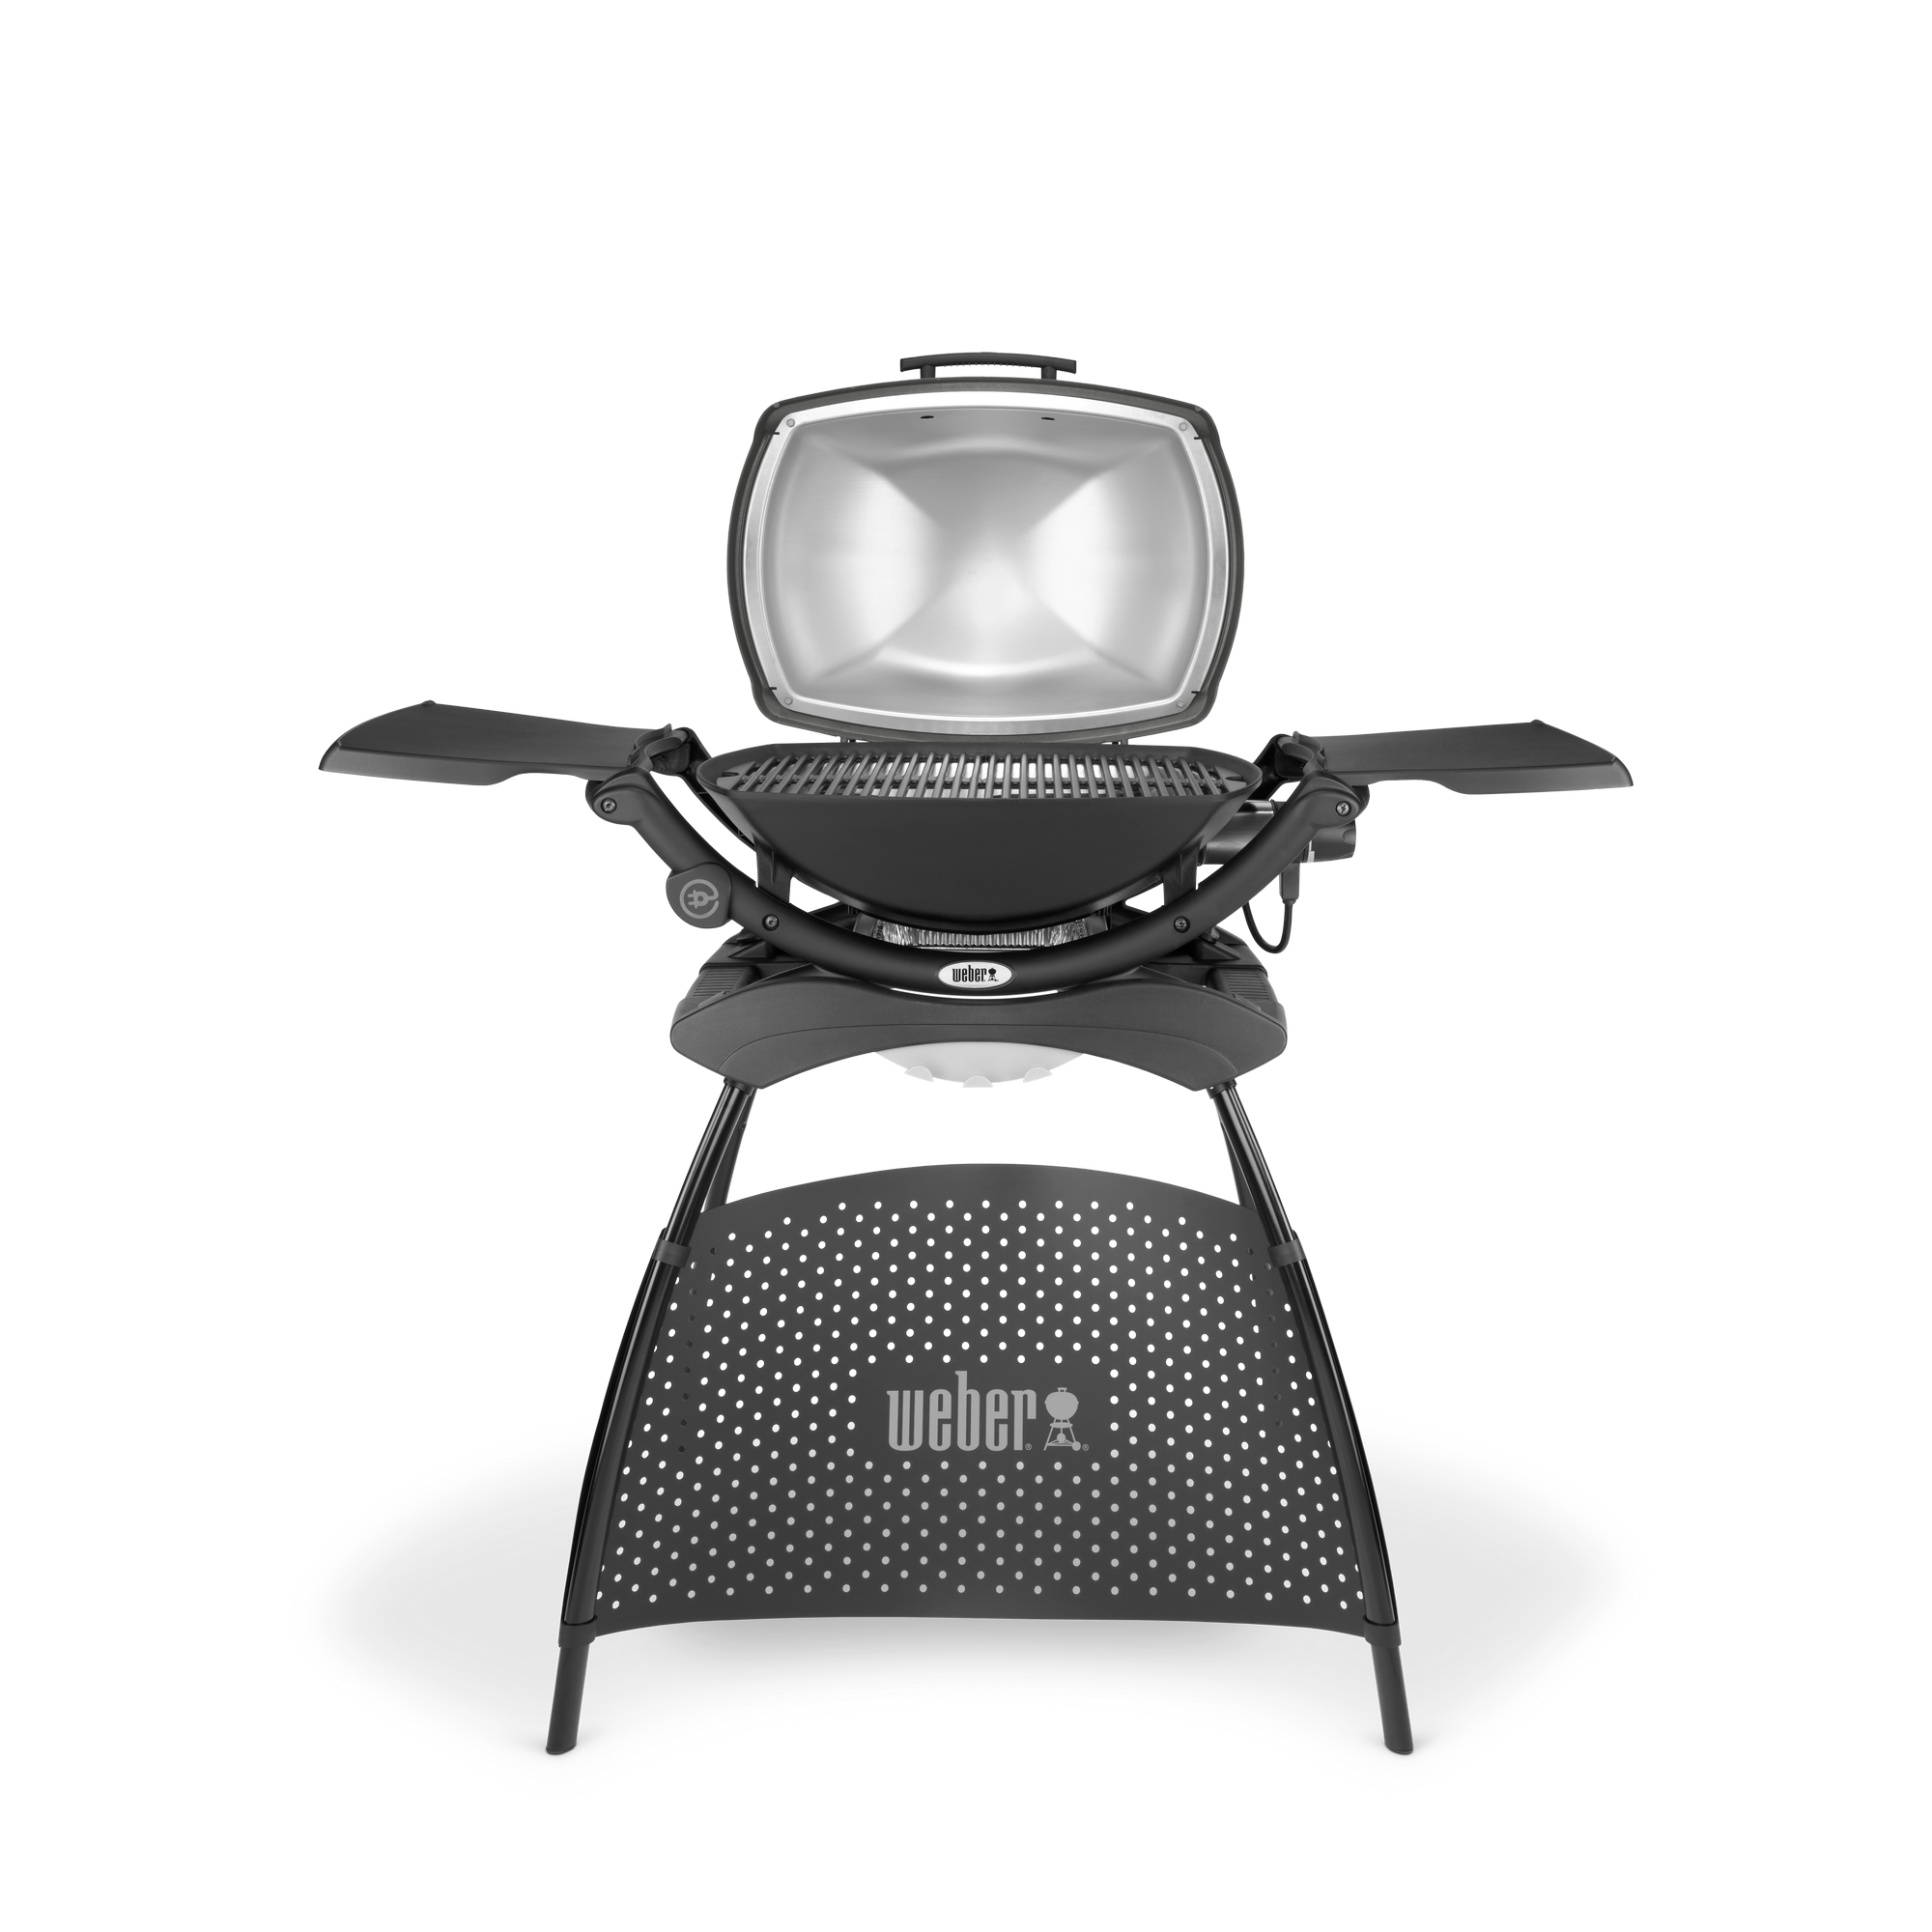 Elektrogrill 'Weber® Q 2400' mit Stand dunkelgrau + product picture